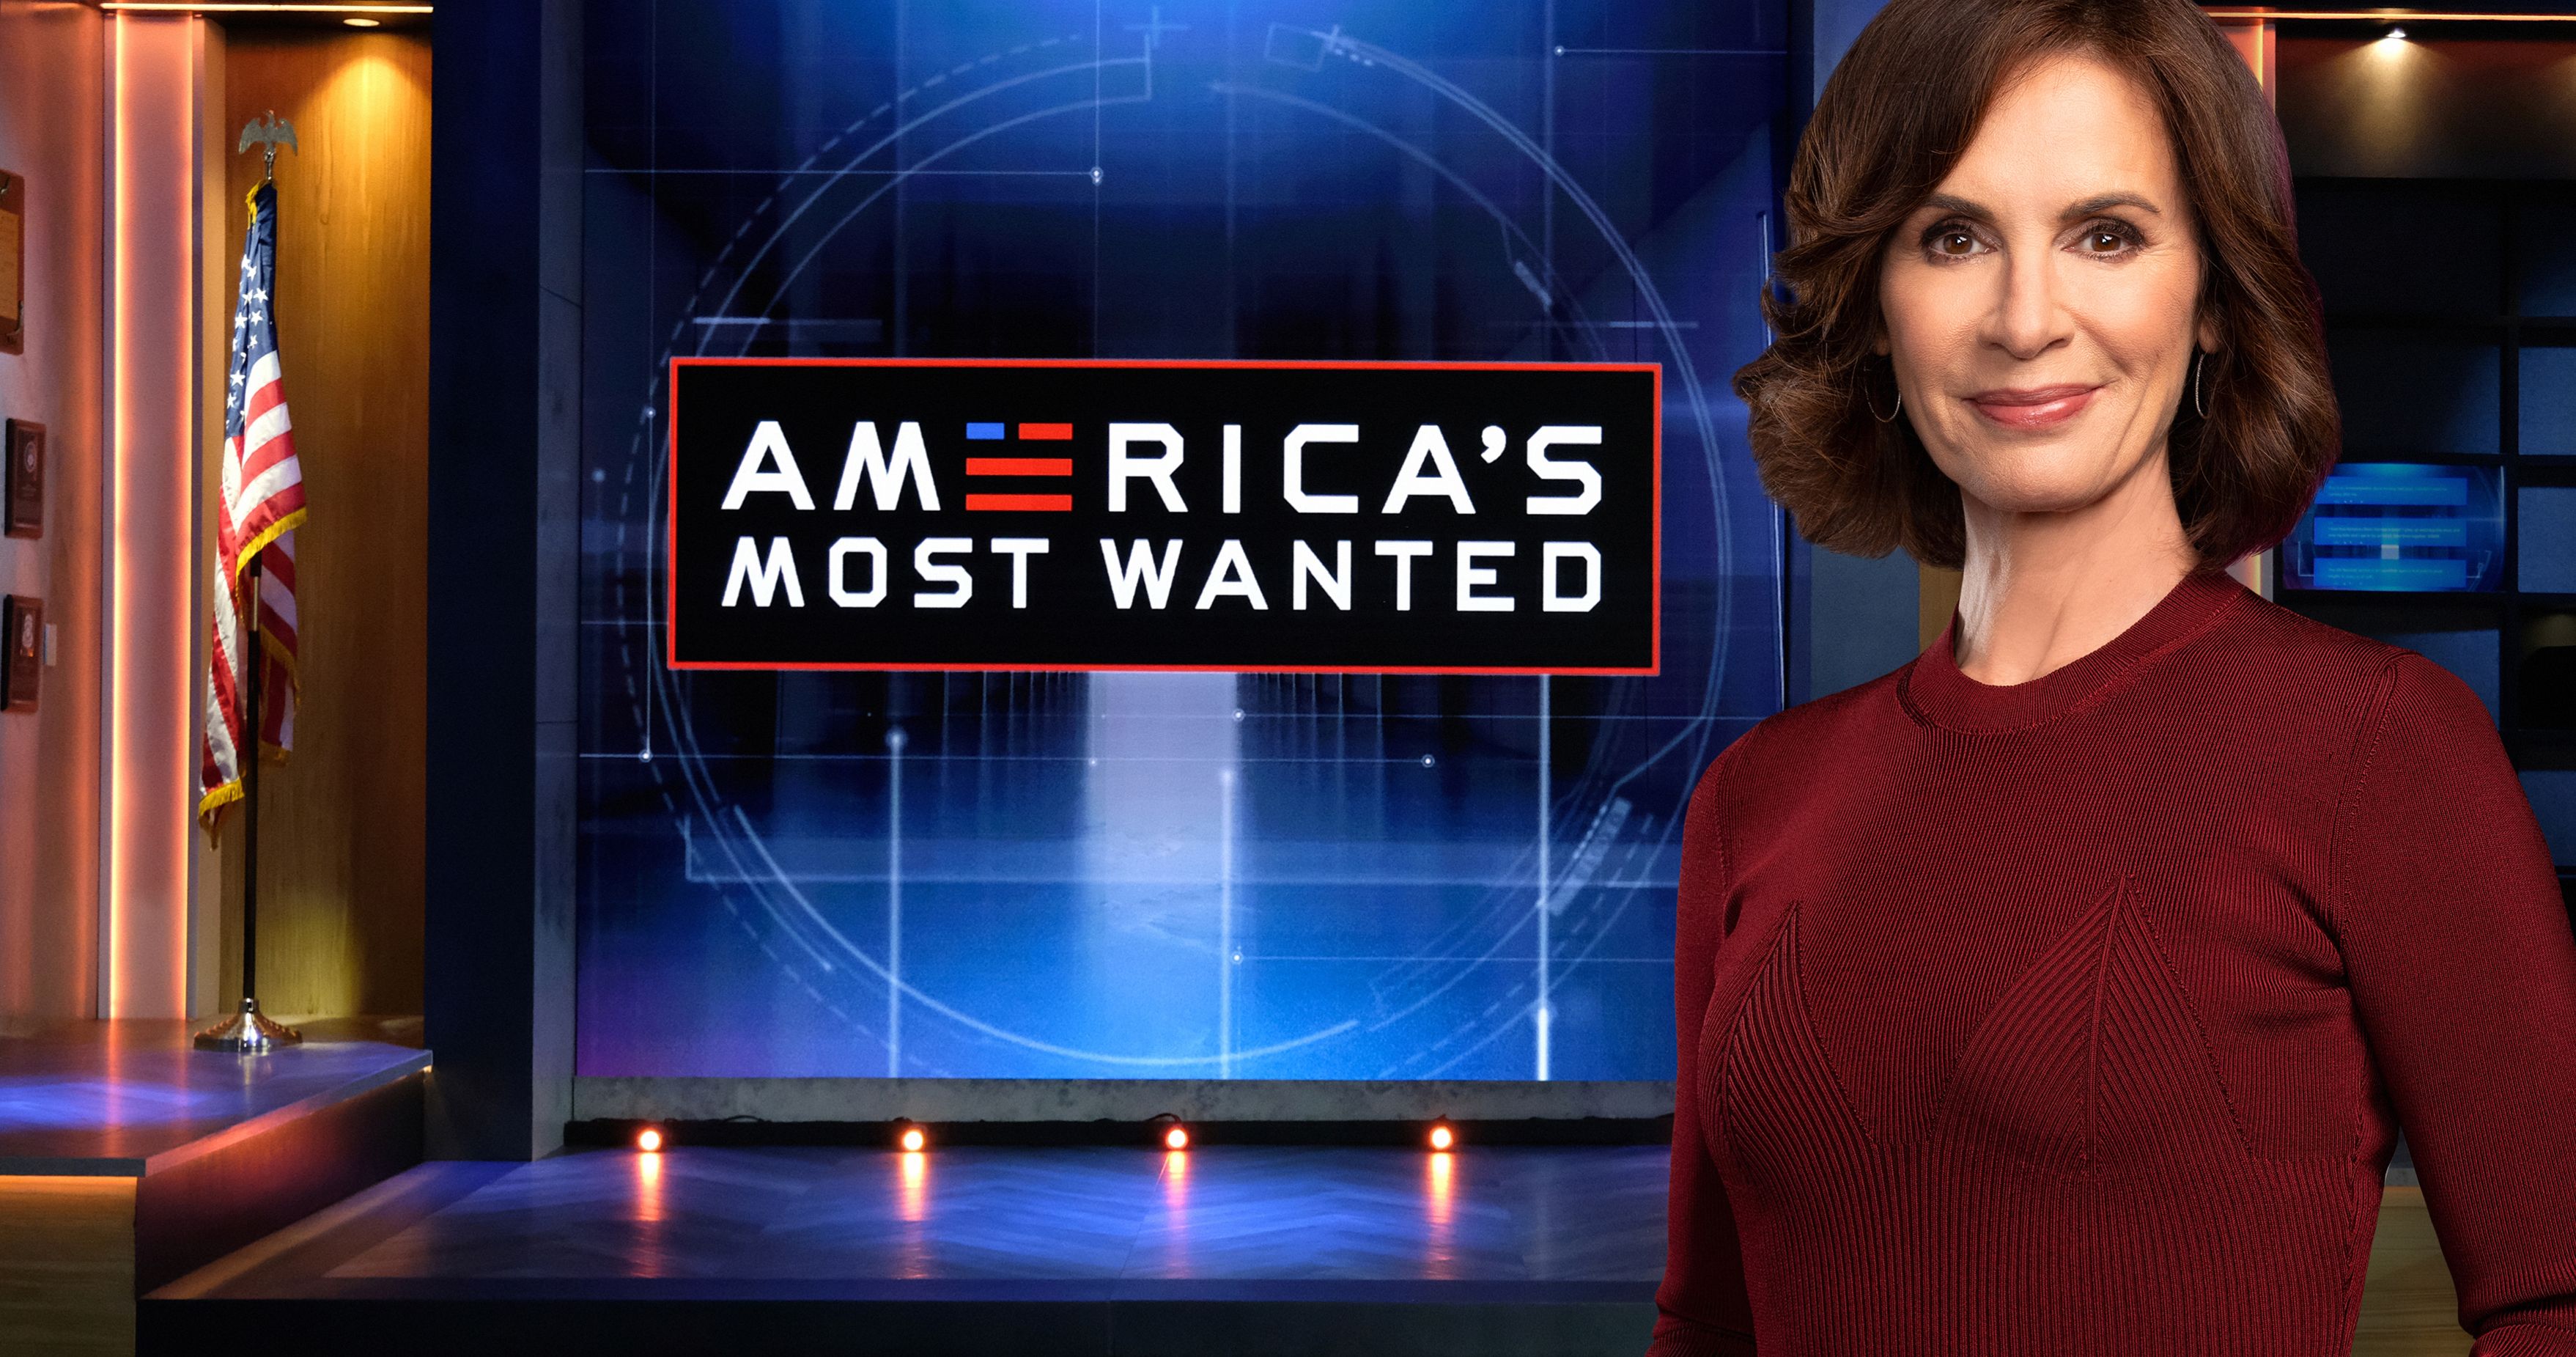 America's Most Wanted Revival Series Is Happening at Fox with New Host Elizabeth Vargas